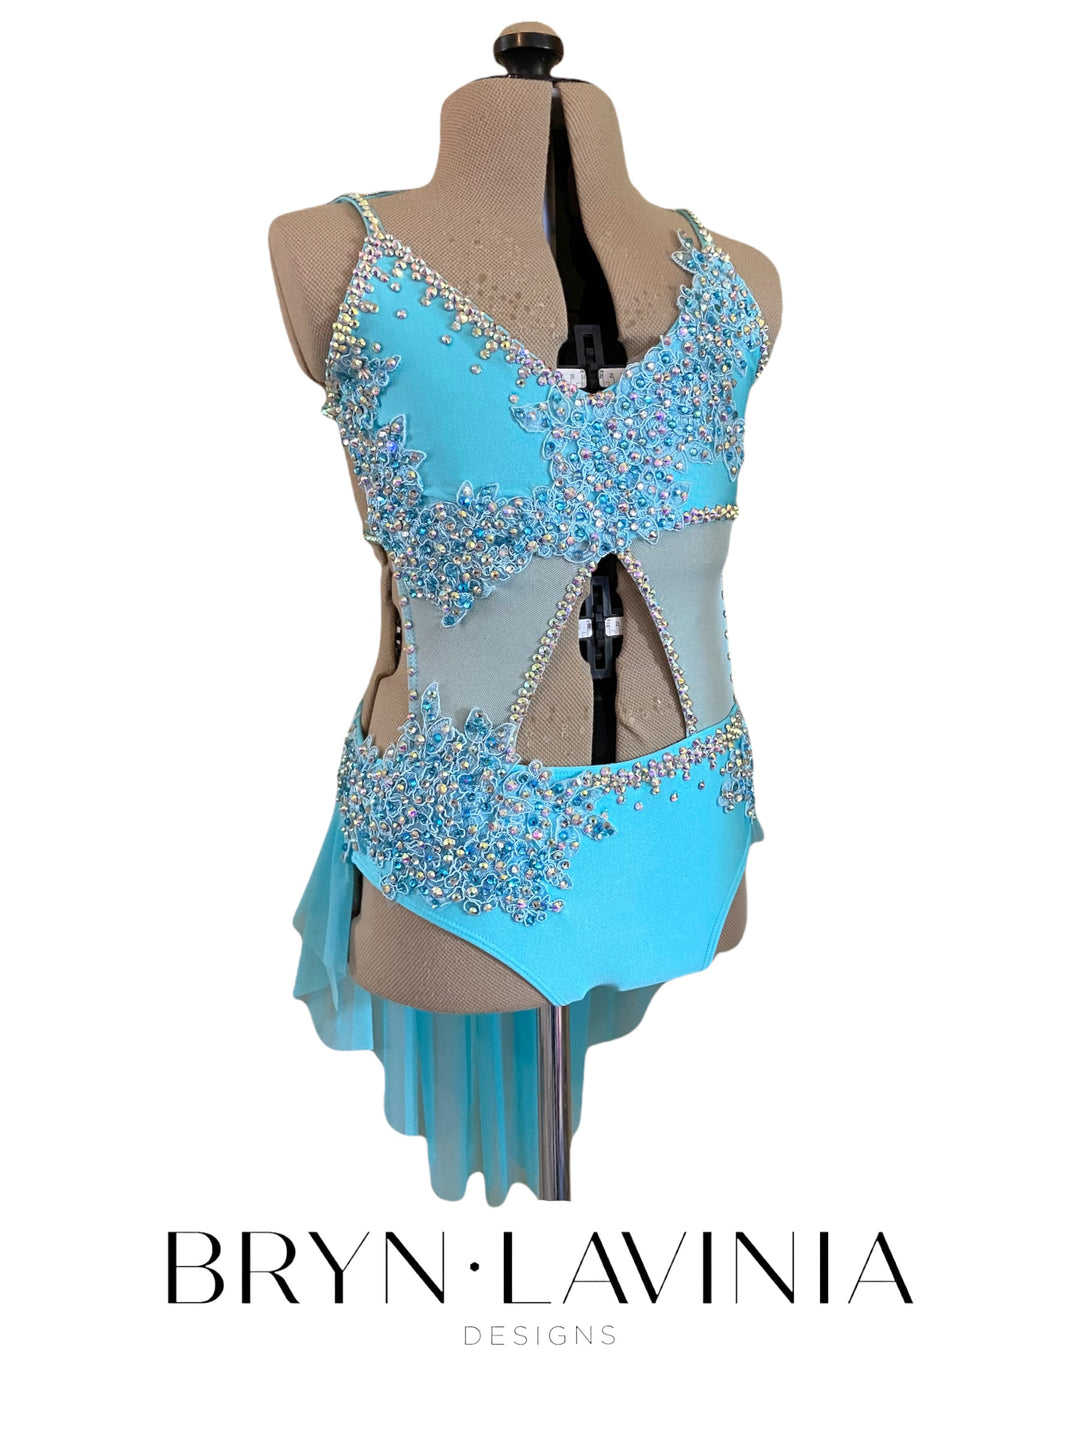 NEW CL/CXL light blue ready-to-ship costume